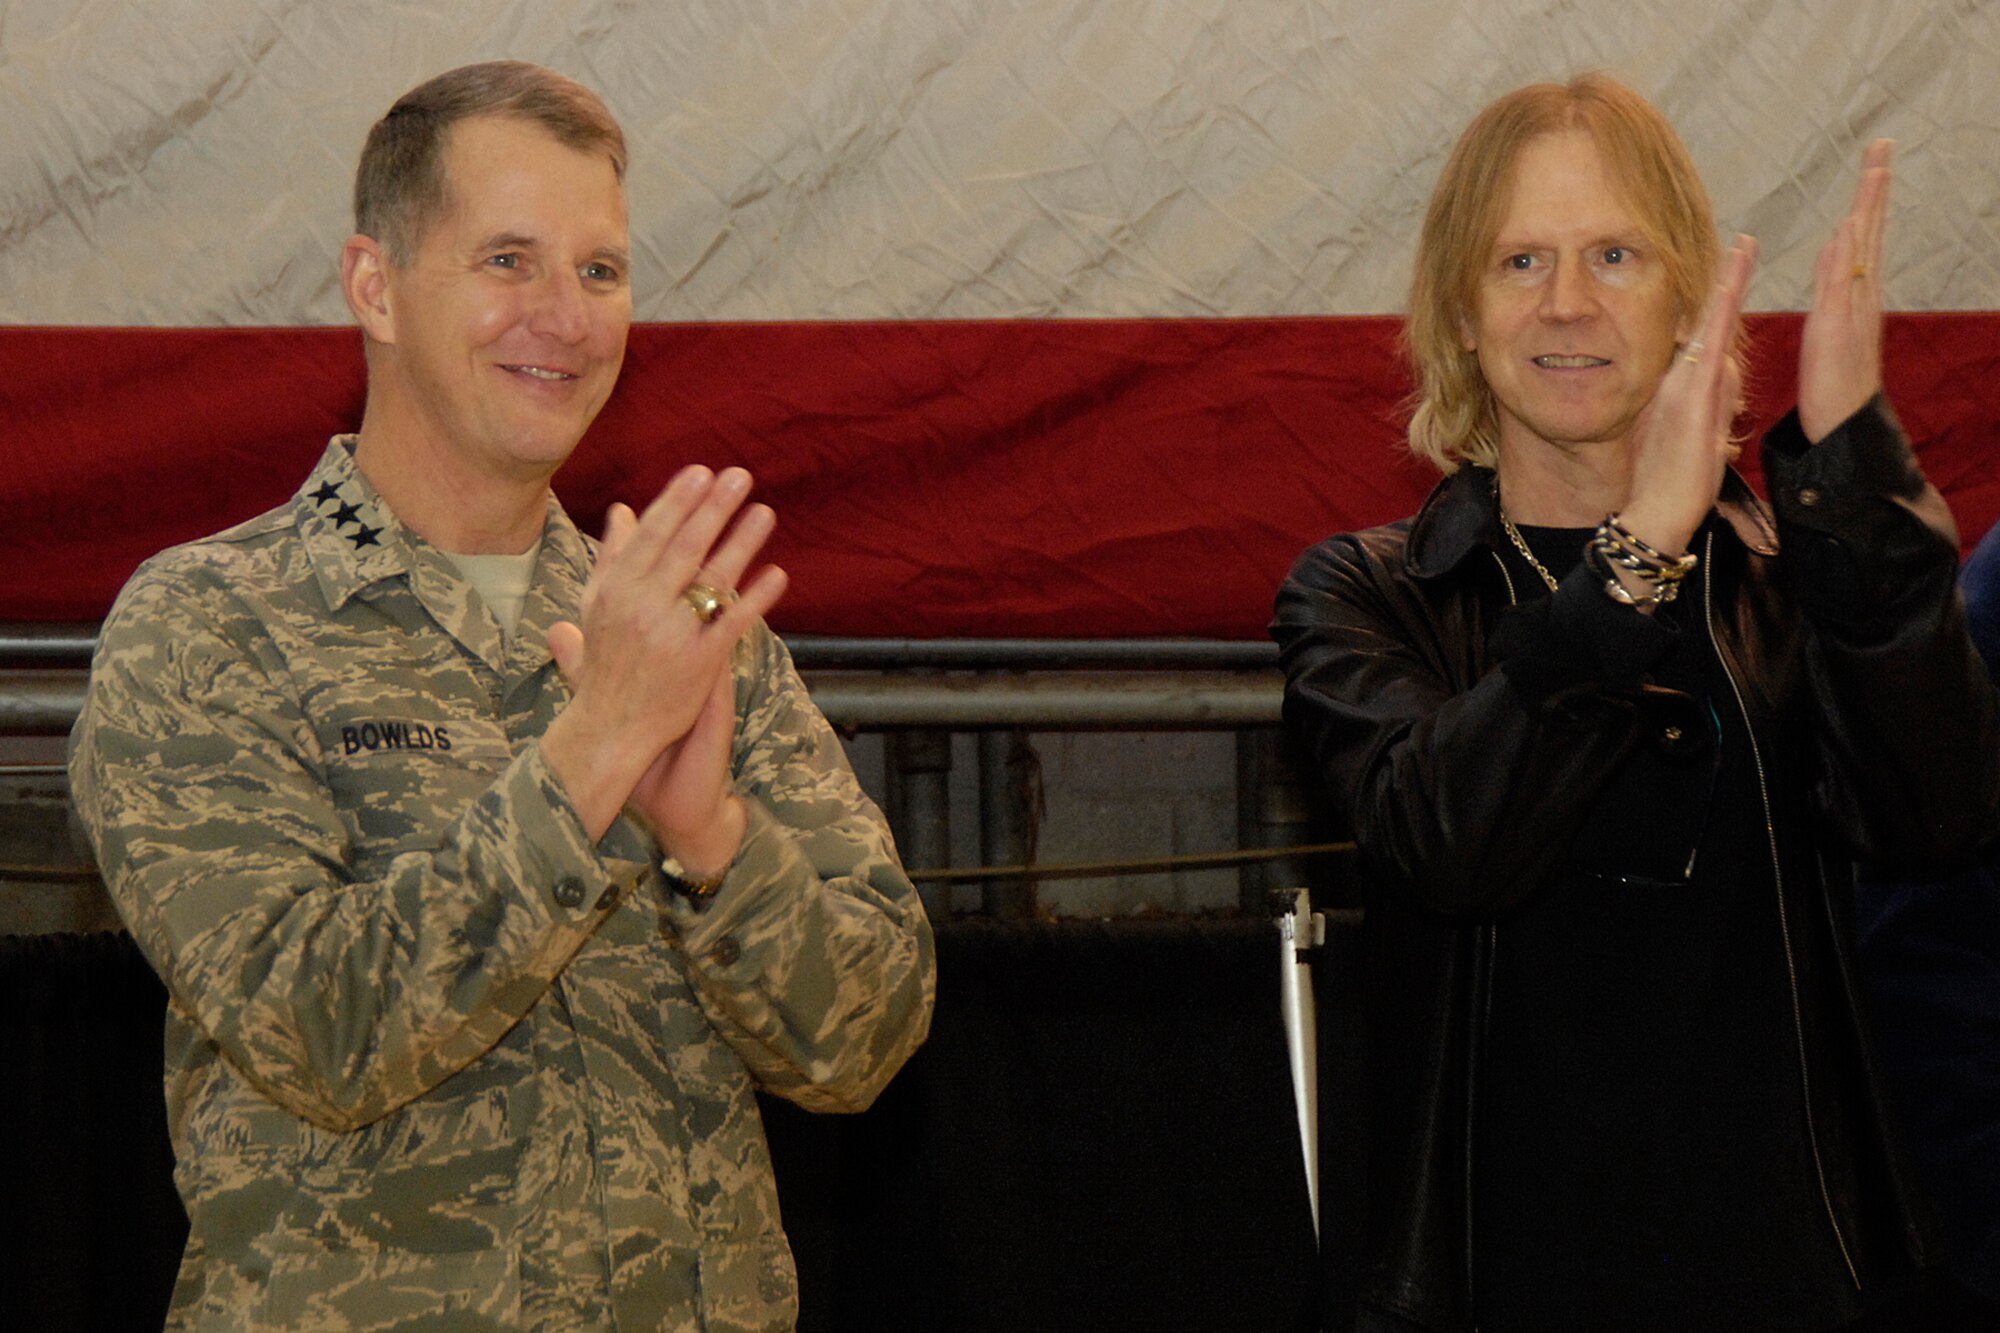 HANSCOM AIR FORCE BASE, Mass. – Lt. Gen. Ted Bowlds (left), Electronic Systems Center commander and Tom Hamilton (right), bassist for the rock group Aerosmith clap to the Air Force song at the conclusion of the Heroes’ Homecoming celebration on Dec. 12. The event officially welcomed home more than 45 Hanscom Airmen that have been deployed over the past six months and paid tribute to their families. (U.S. Air Force photo by Linda LaBonte Britt)